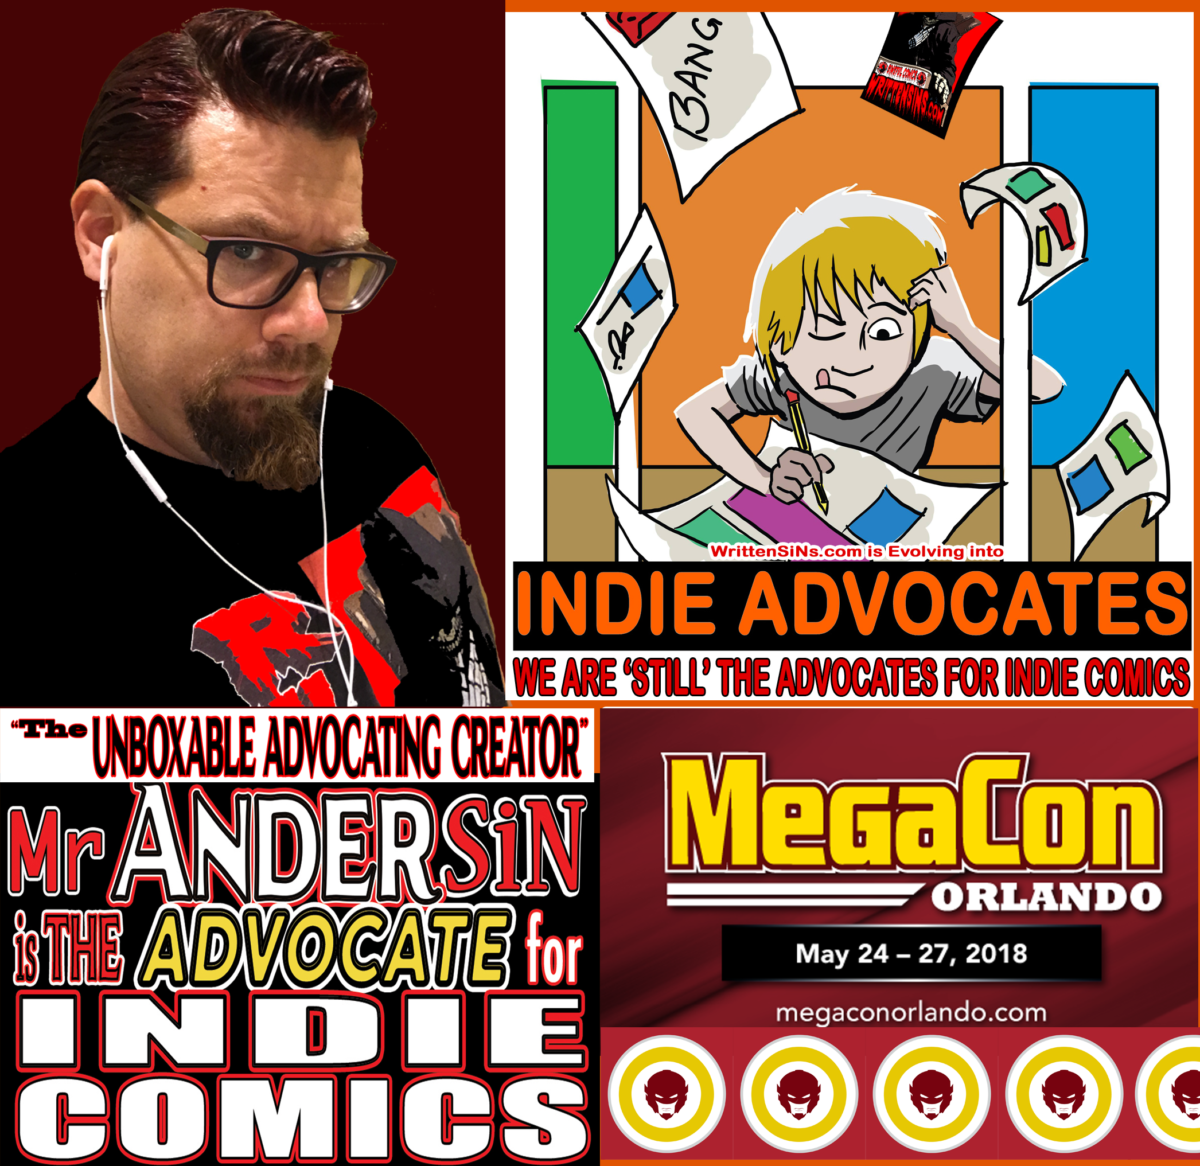 COMIC CON HIGHWAY EXITING with INDIE ADVOCATING  in FLORIDA::  MEGA CON ORLANDO May 24-27-INDIE ADVOCATES and MR Andersin are gonna do some MEGA ADVOCATING  .